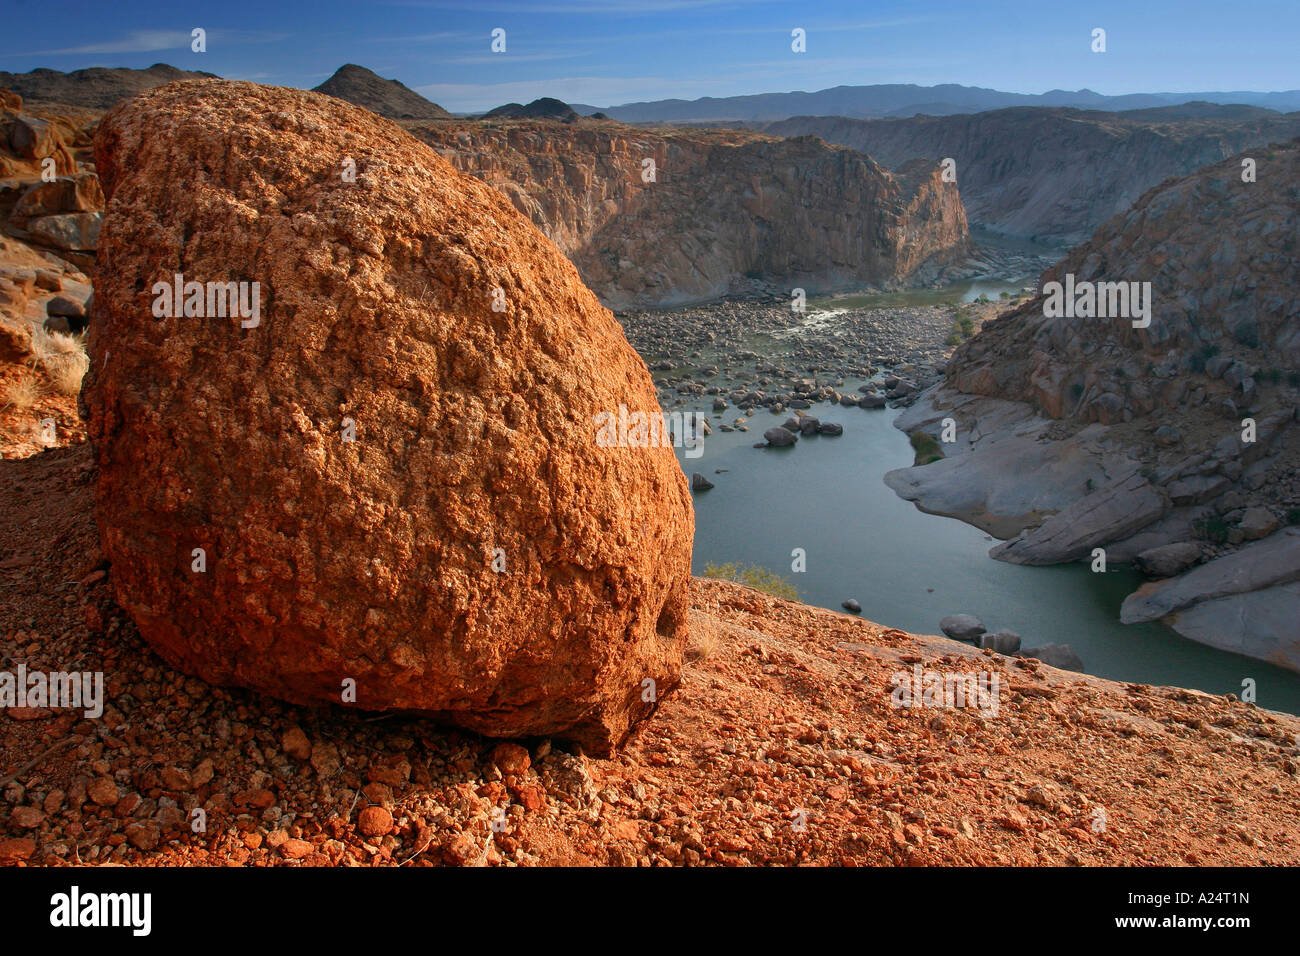 canyon of the Orange river with red granite rocks Augrabis Falls National Park South Africa Stock Photo